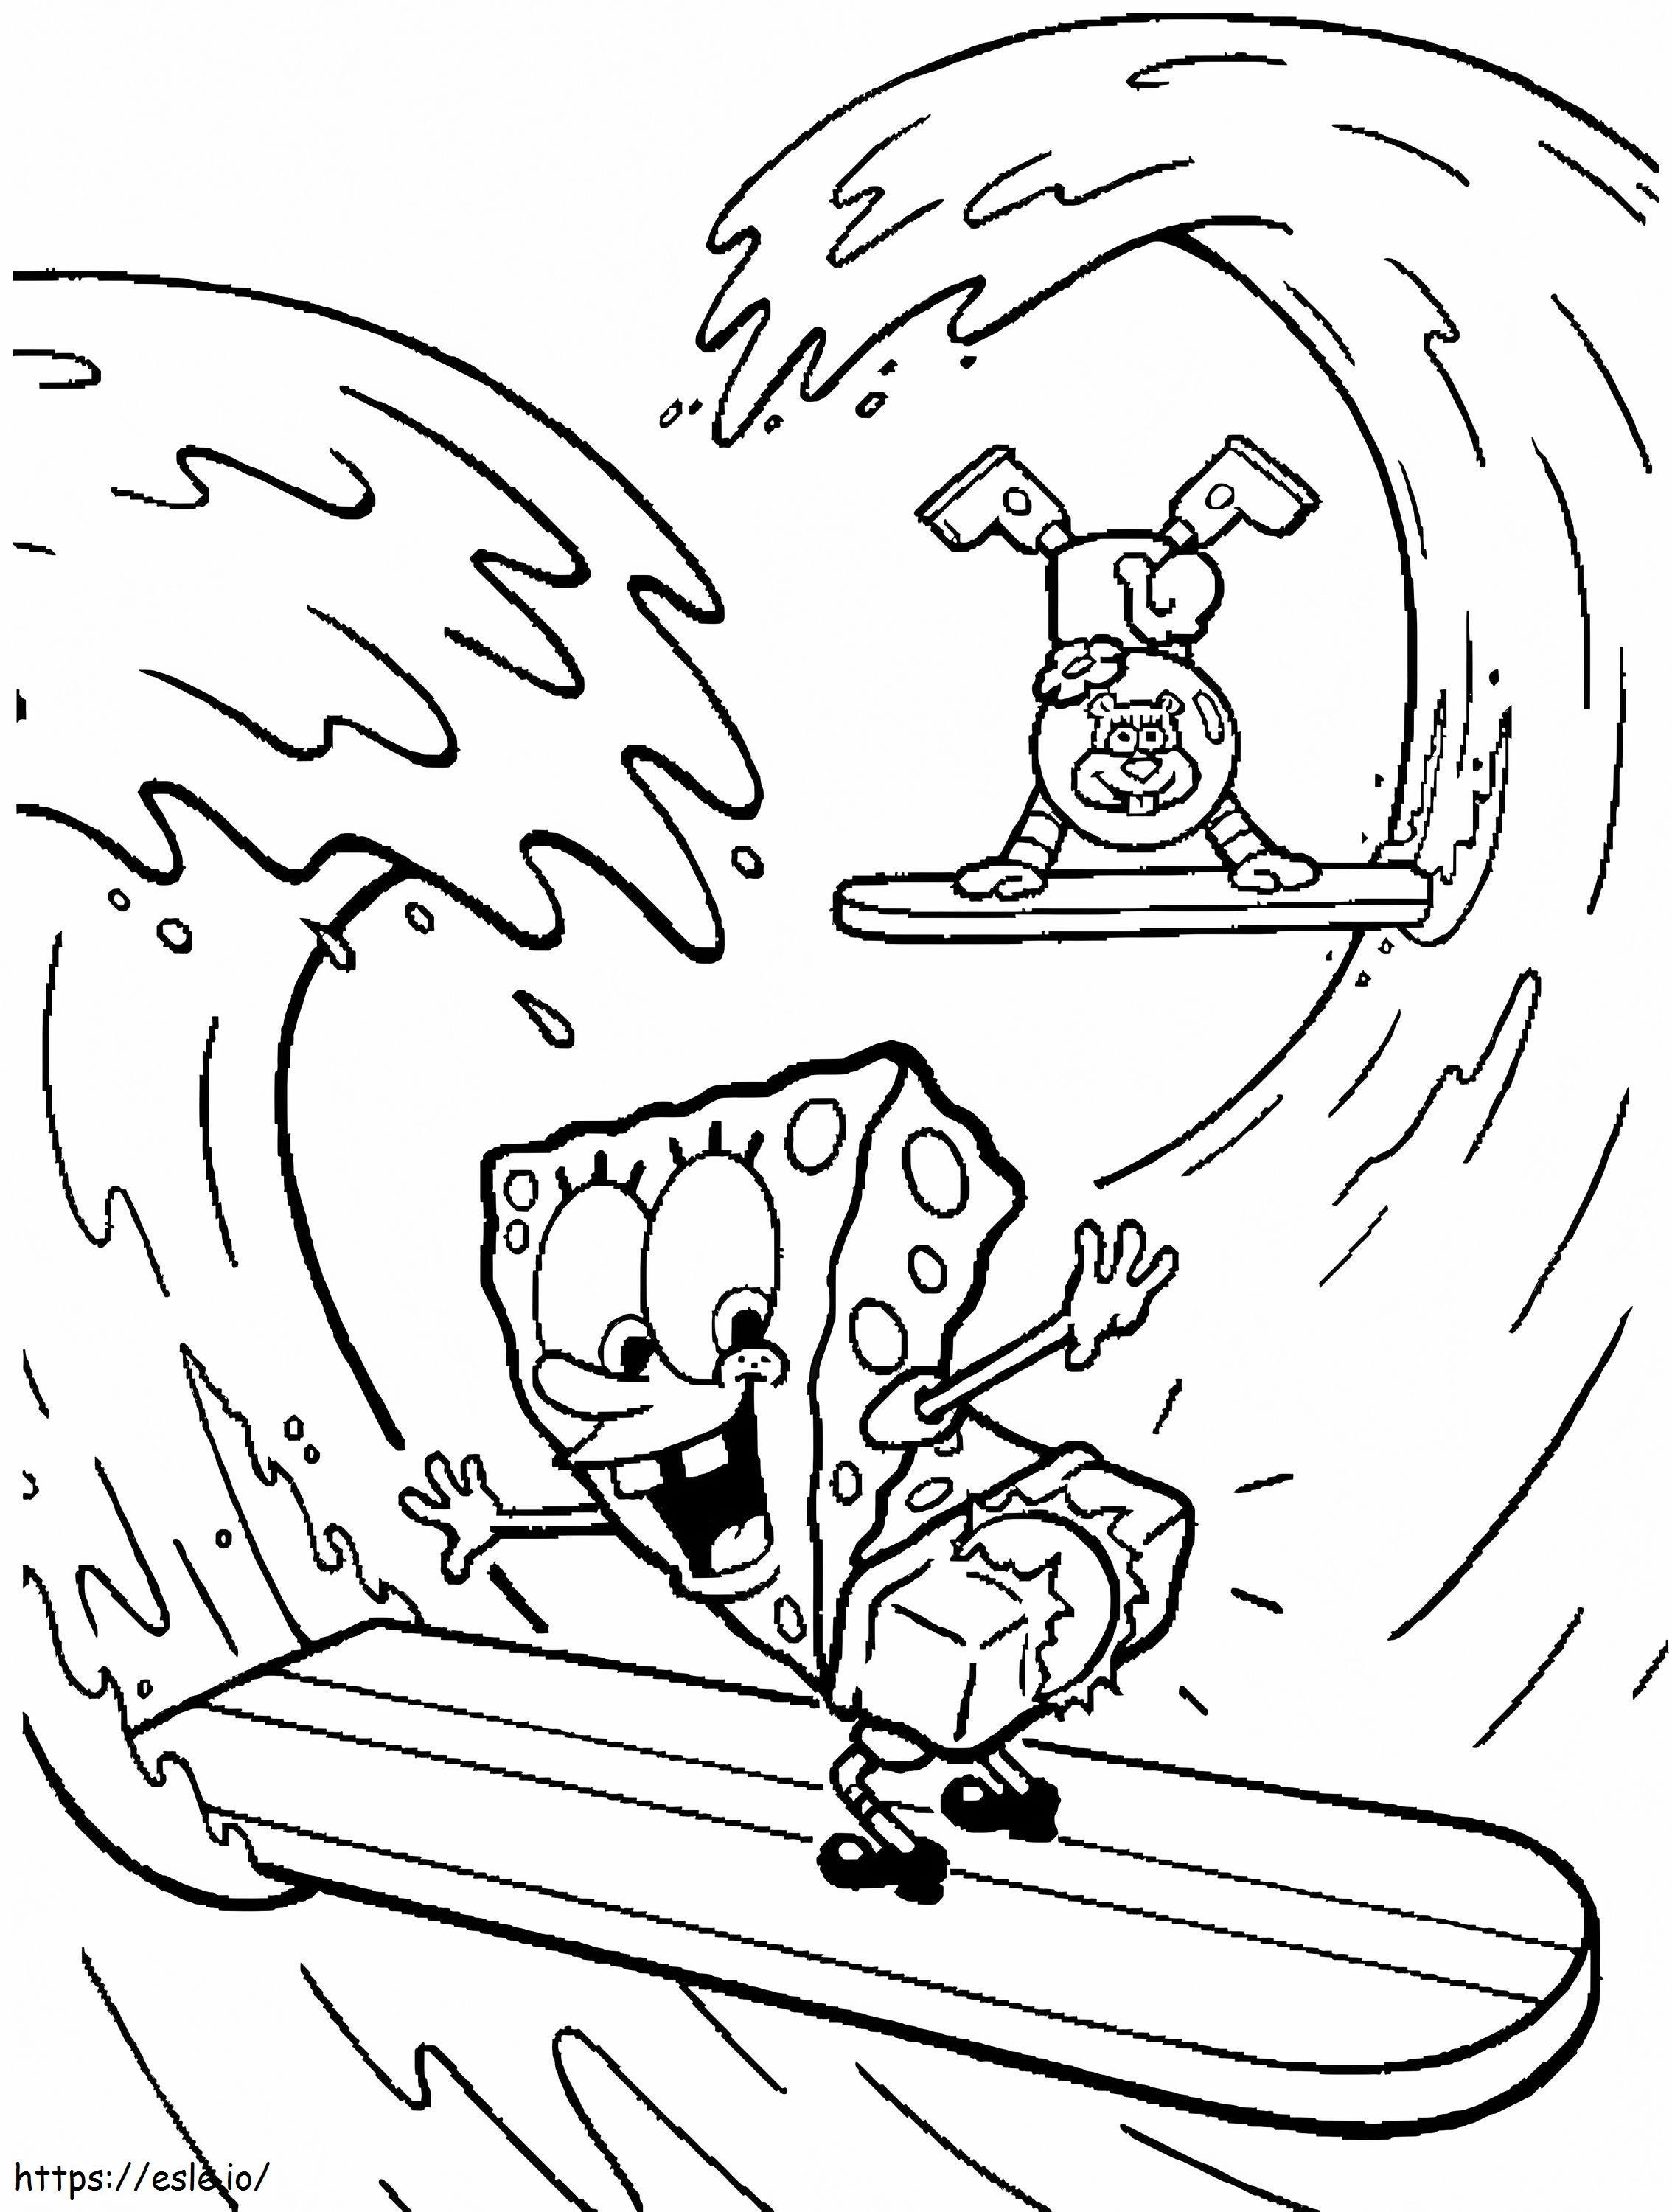 Spongebob And Sandy Cheeks coloring page